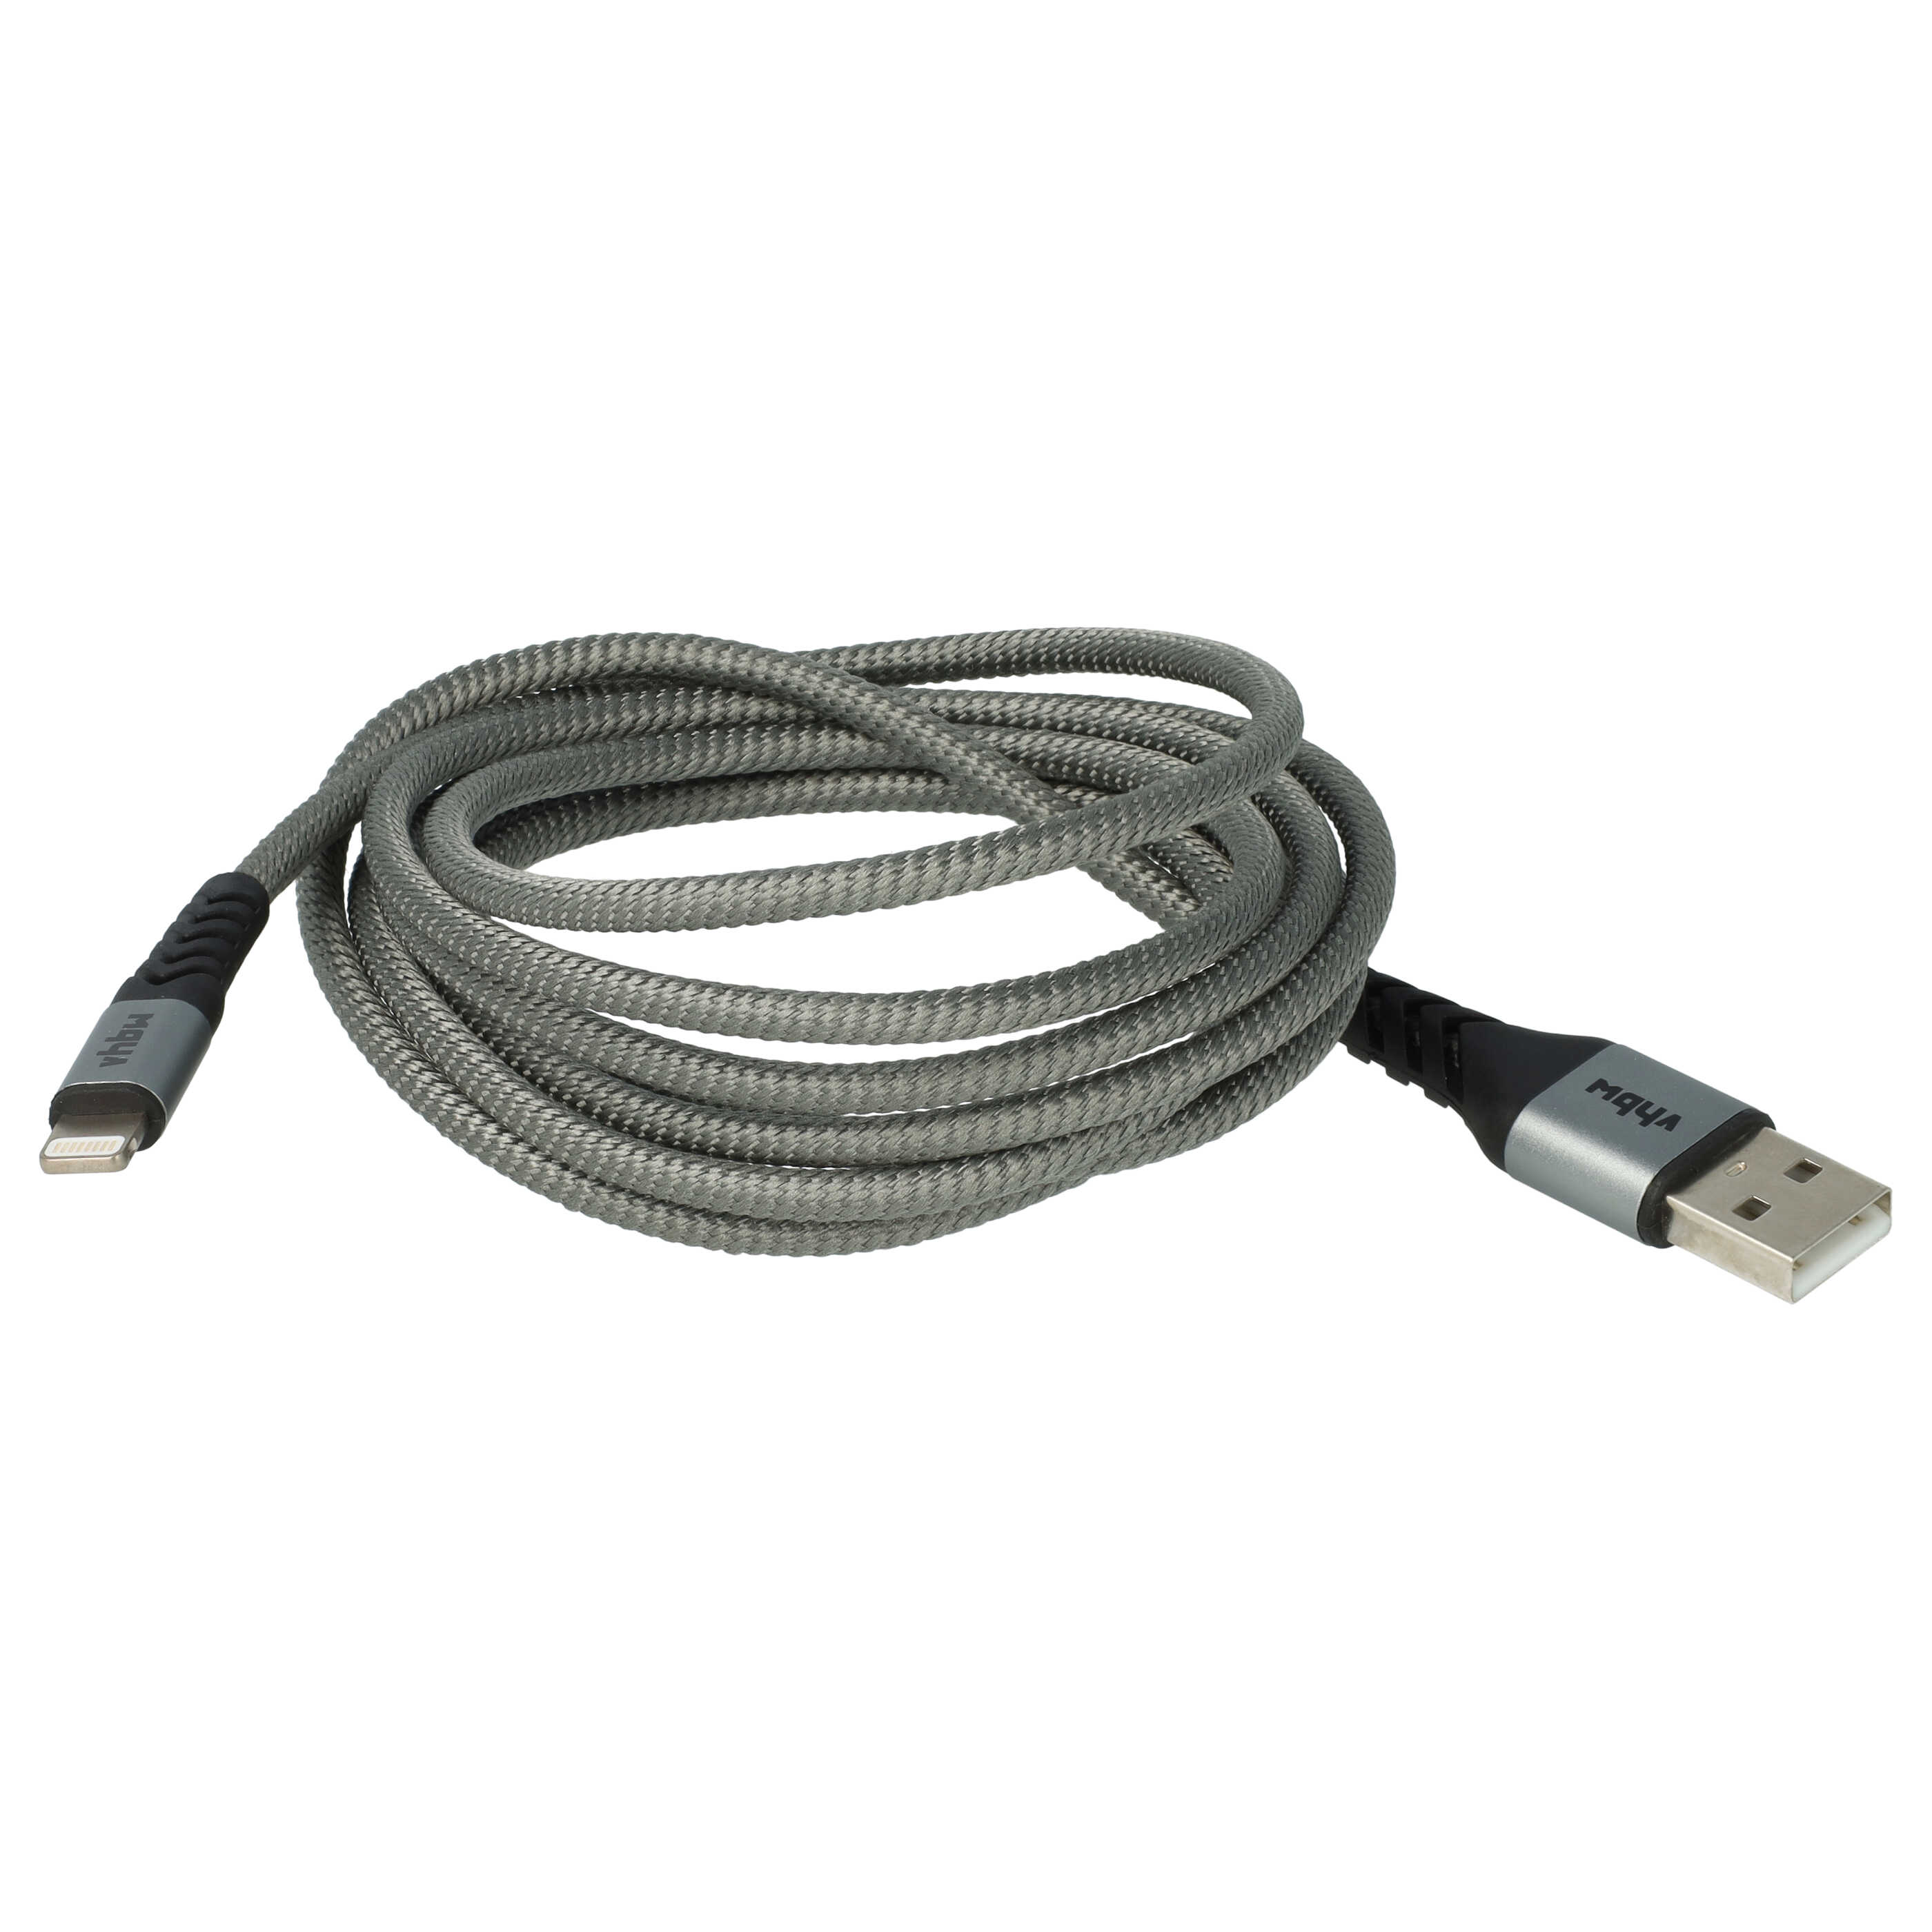 Lightning Cable - USB A suitable for 1.Generation Apple AirPods Apple iOS - Black Grey, 180cm